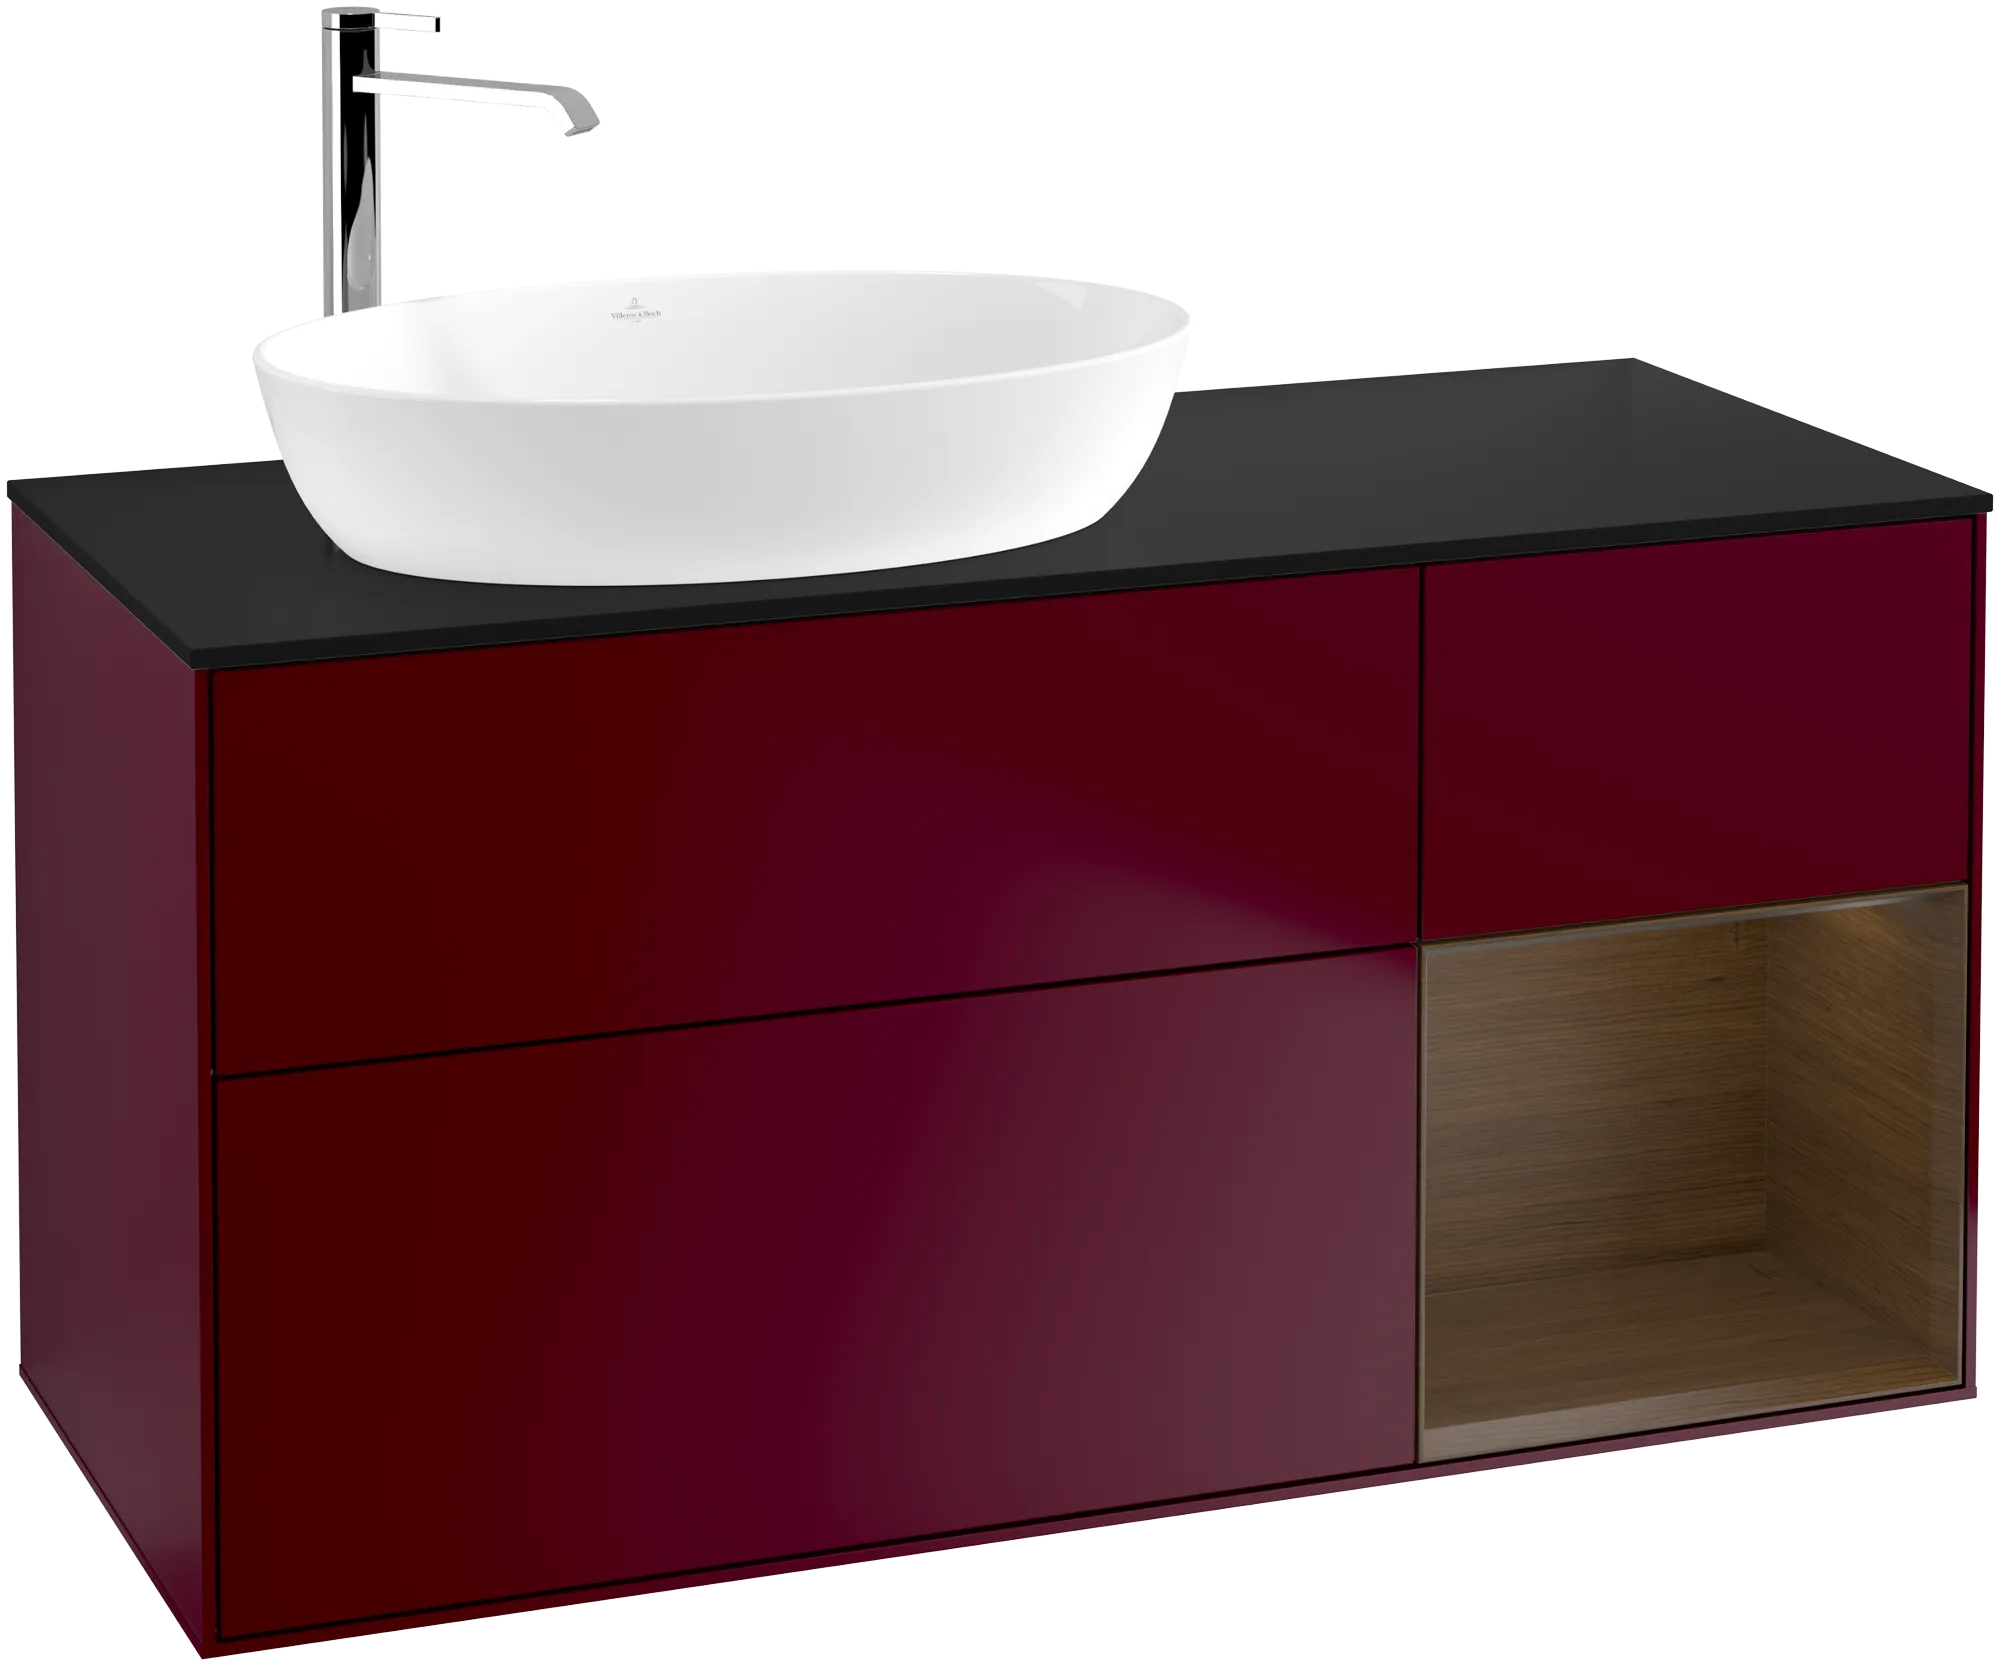 Picture of VILLEROY BOCH Finion Vanity unit, with lighting, 3 pull-out compartments, 1200 x 603 x 501 mm, Peony Matt Lacquer / Walnut Veneer / Glass Black Matt #G932GNHB